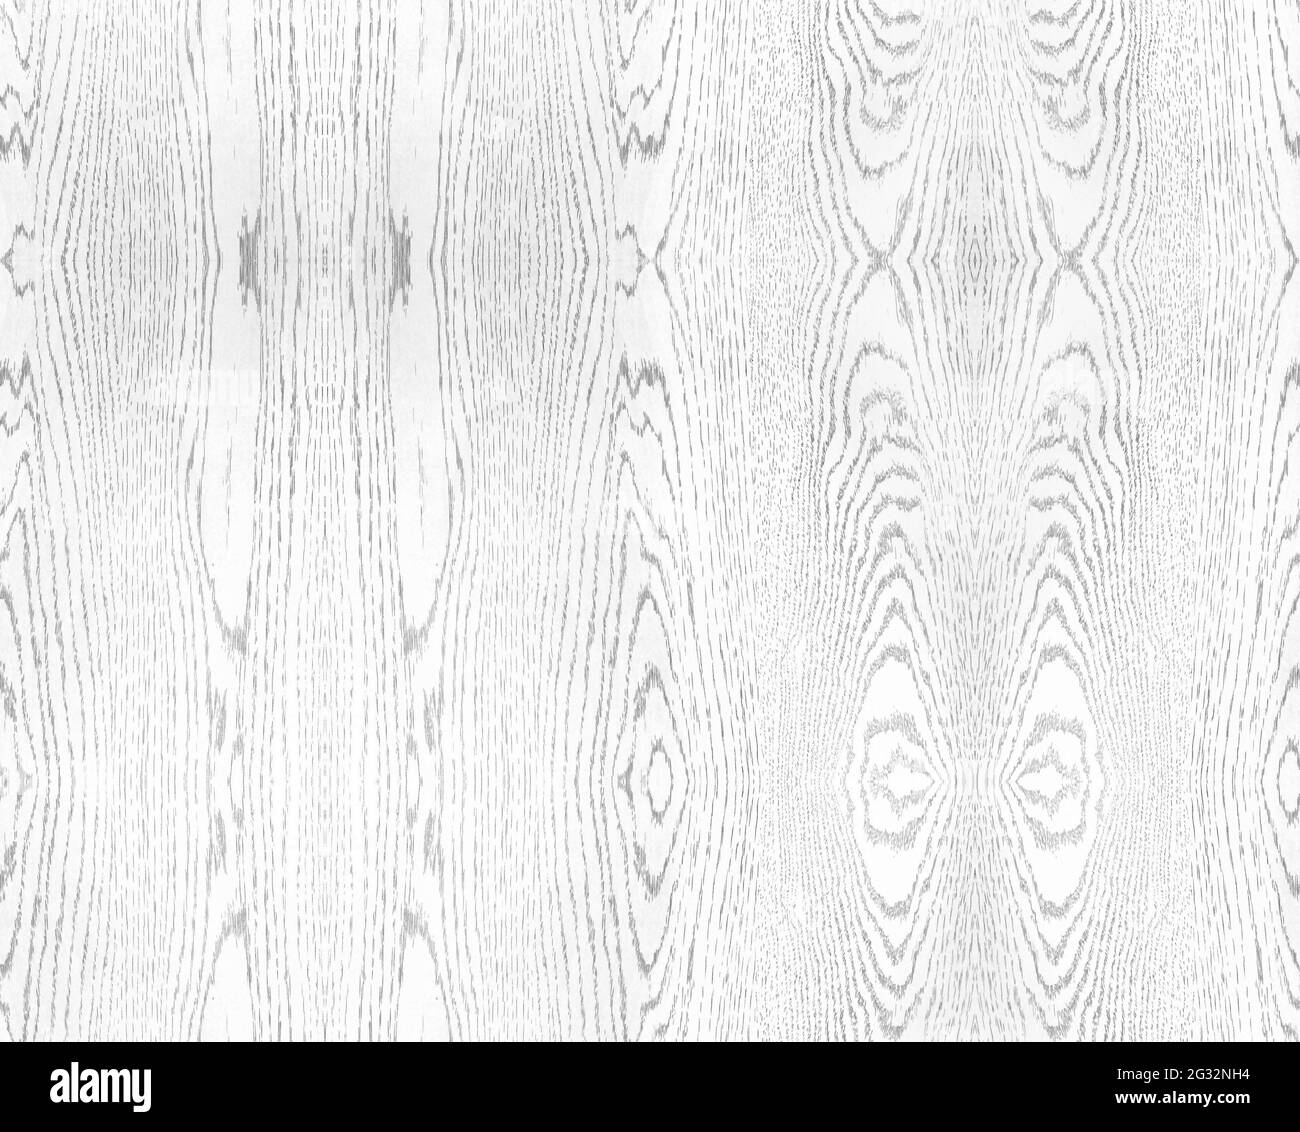 Seamlessly tileable texture bright wood grain. Stock Photo